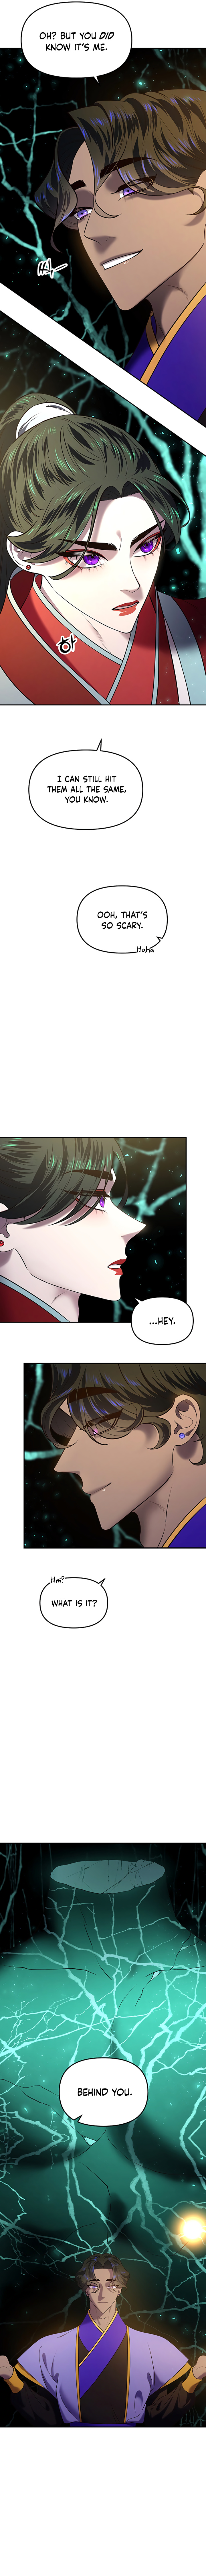 The Prince Of Myeolyeong - Page 6